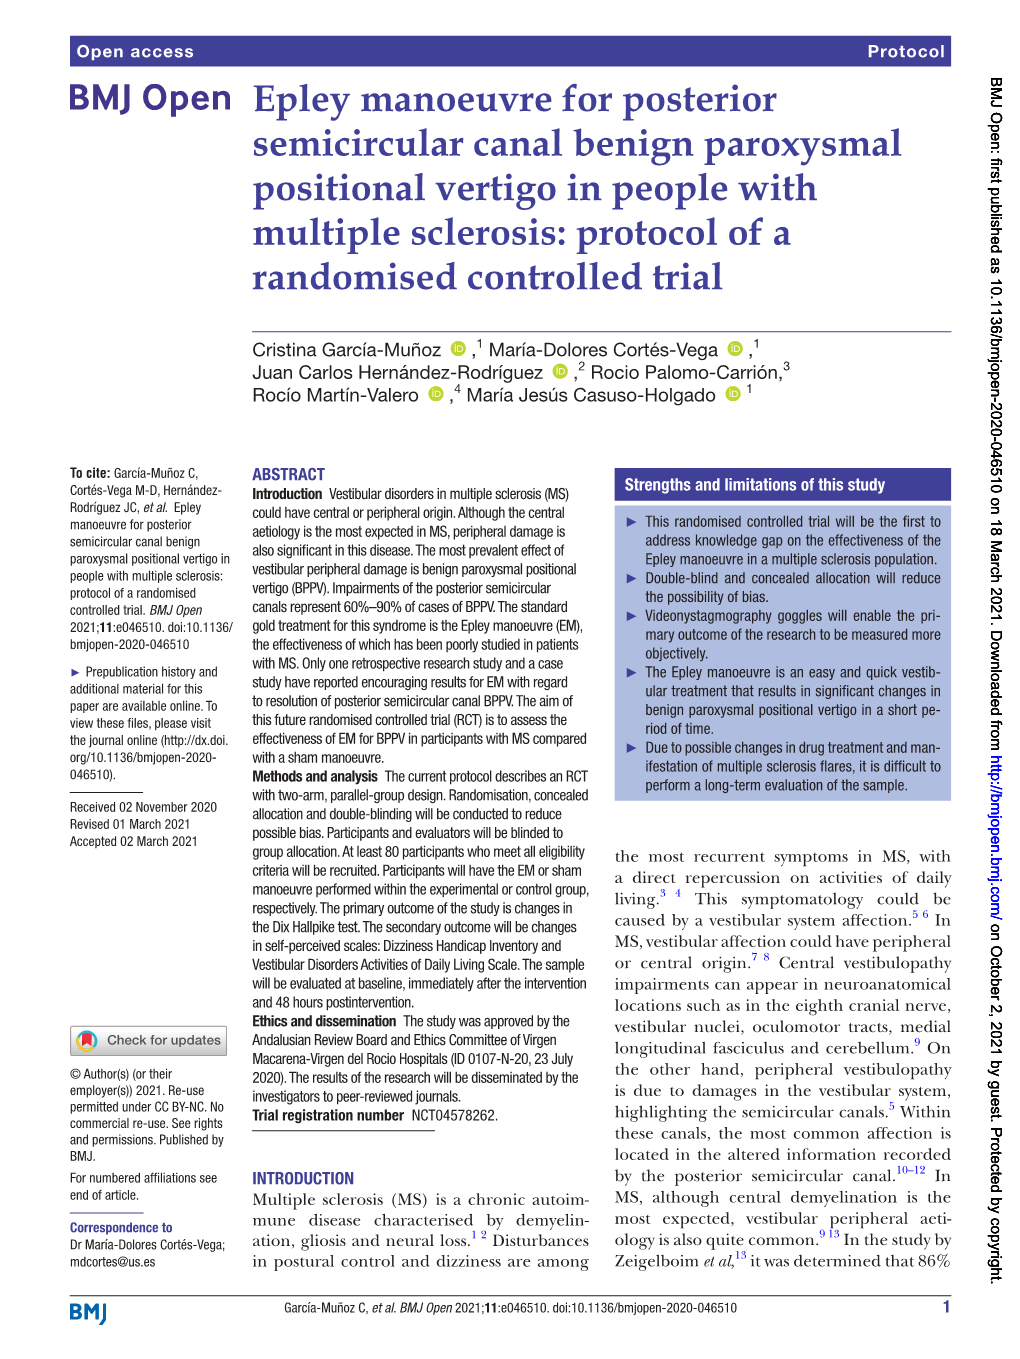 Epley Manoeuvre for Posterior Semicircular Canal Benign Paroxysmal Positional Vertigo in People with Multiple Sclerosis: Protocol of a Randomised Controlled Trial